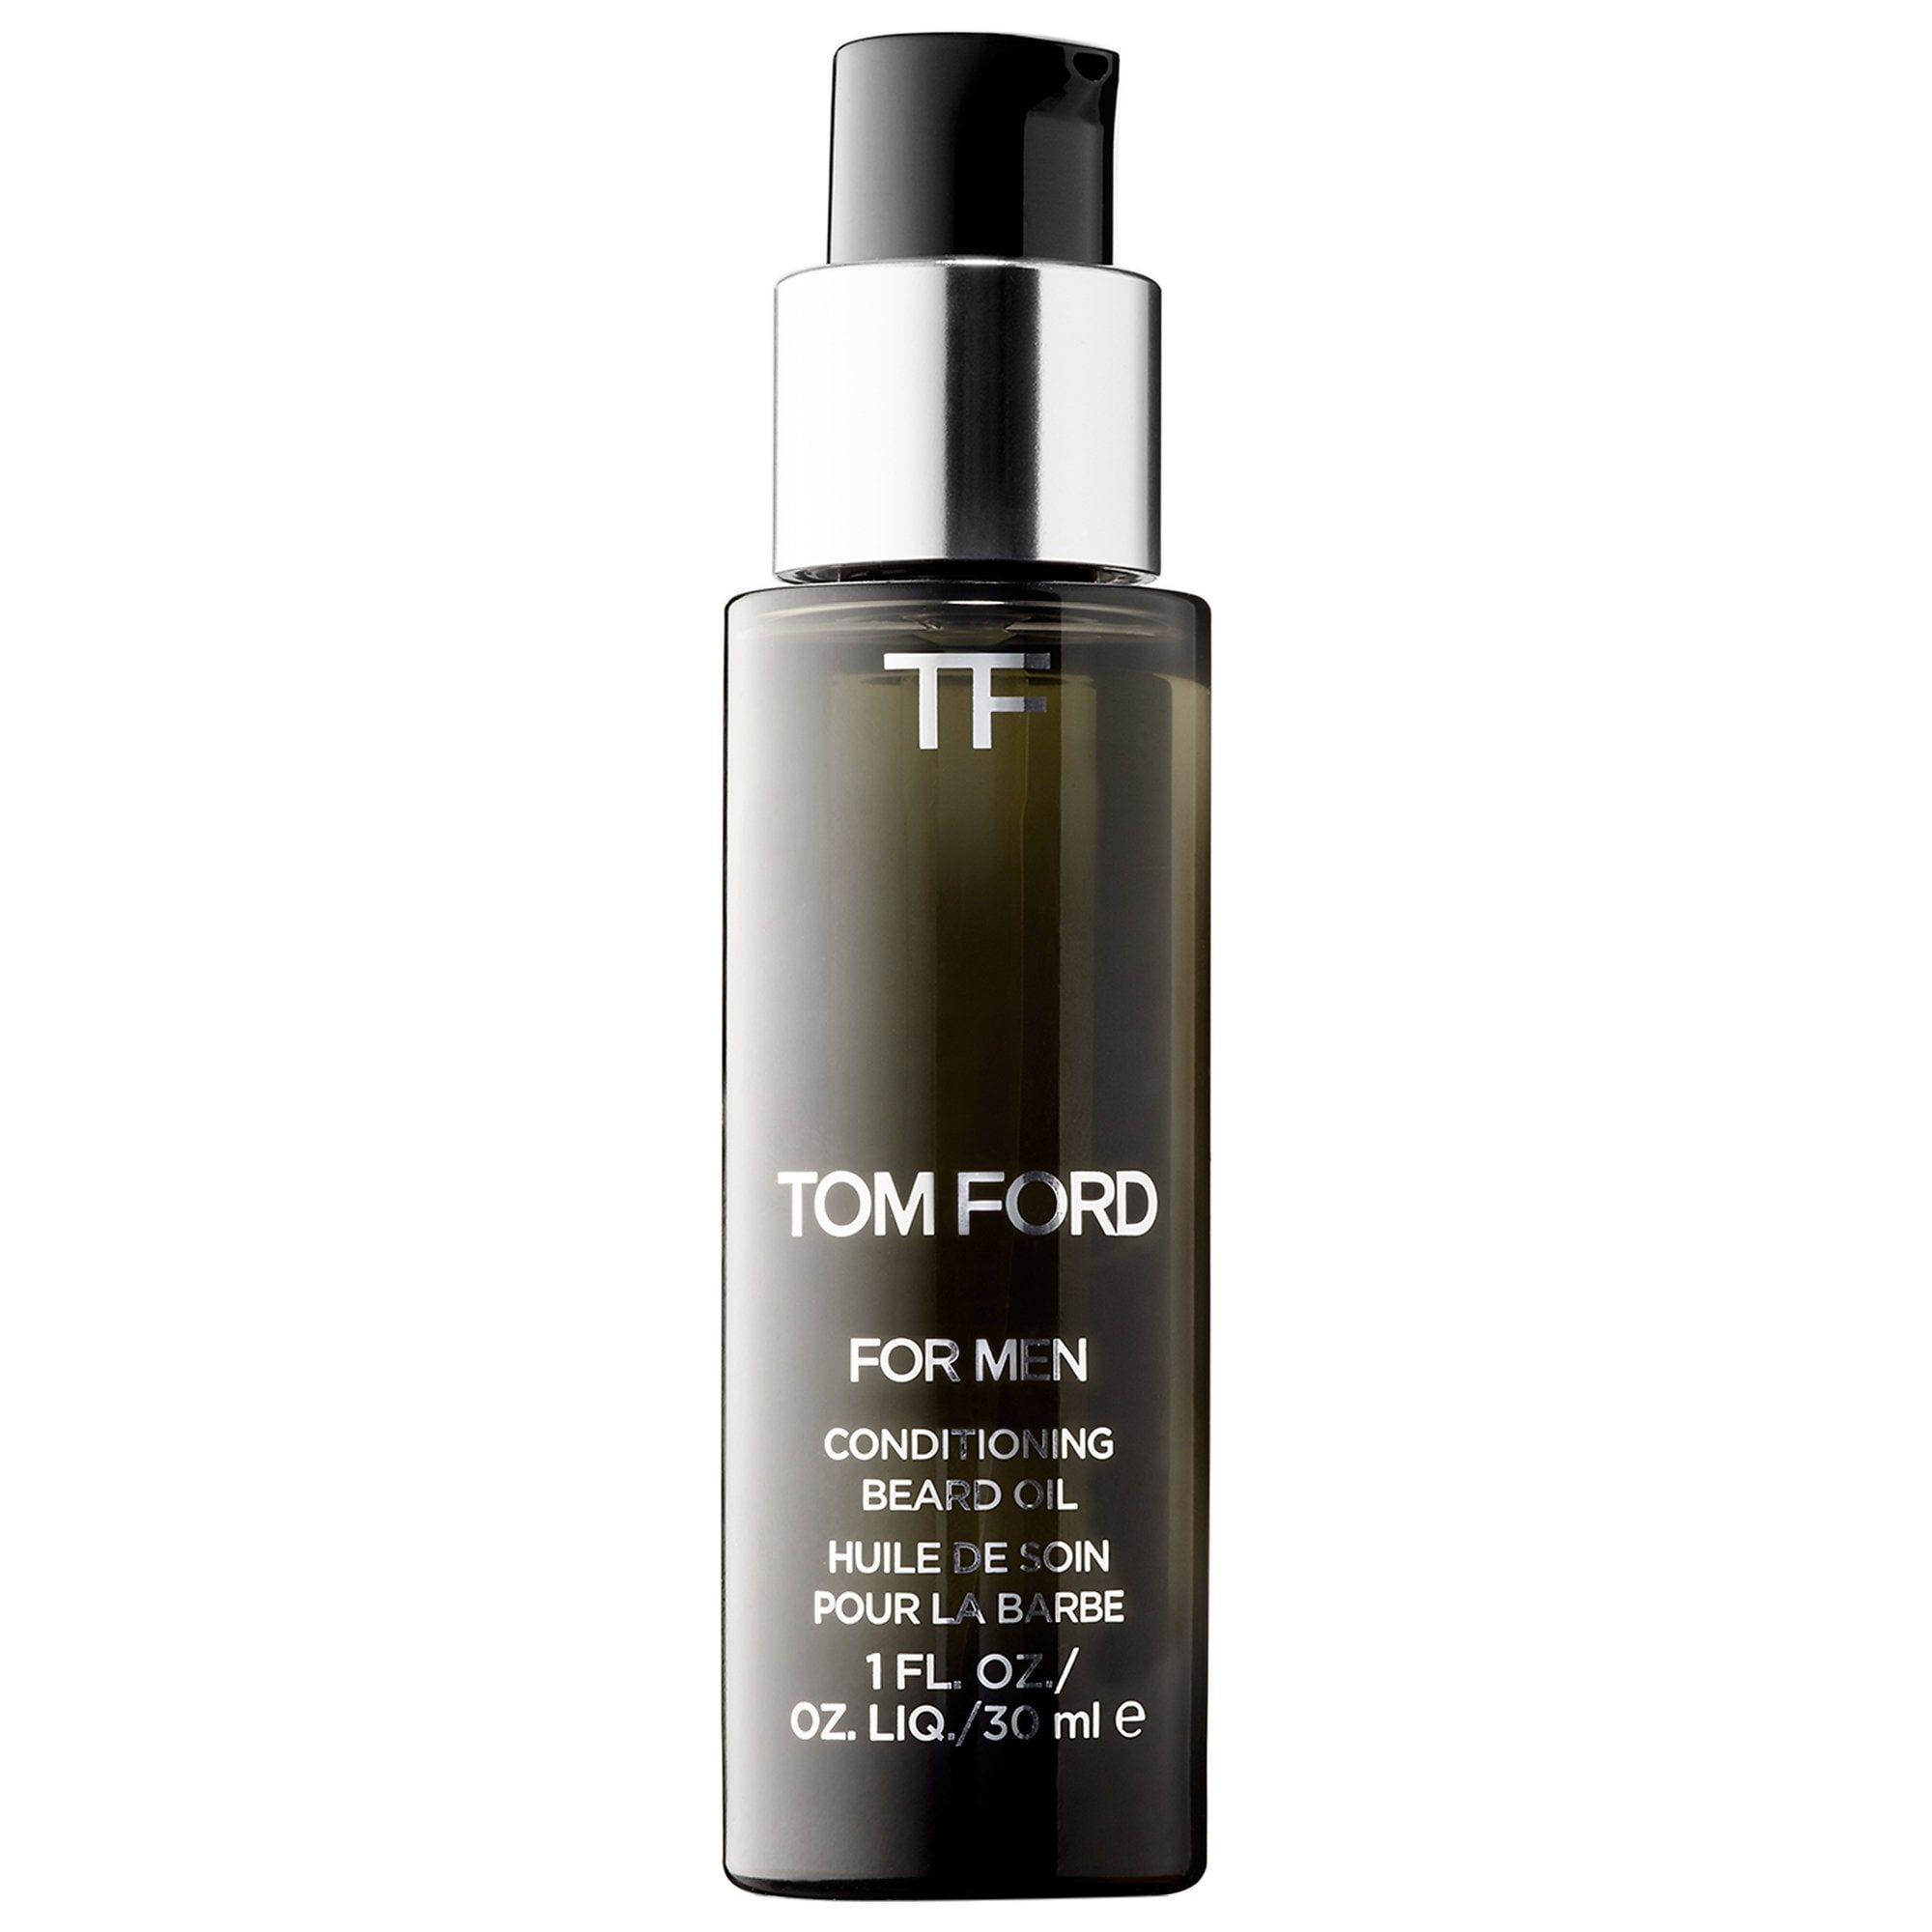 Tom Ford pour homme.